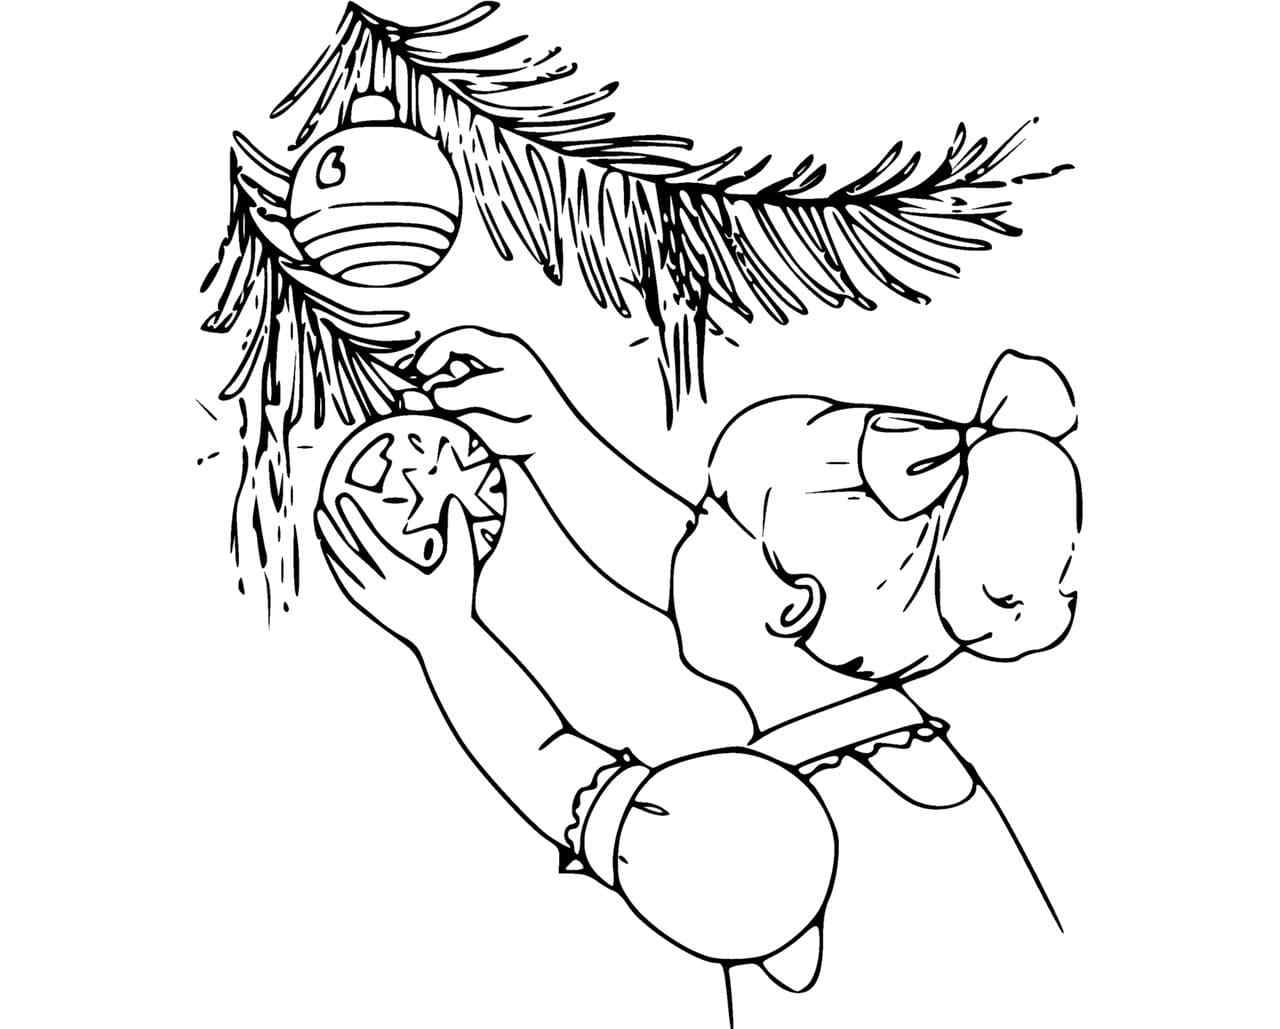 Decorates Christmas Tree branches Coloring Page